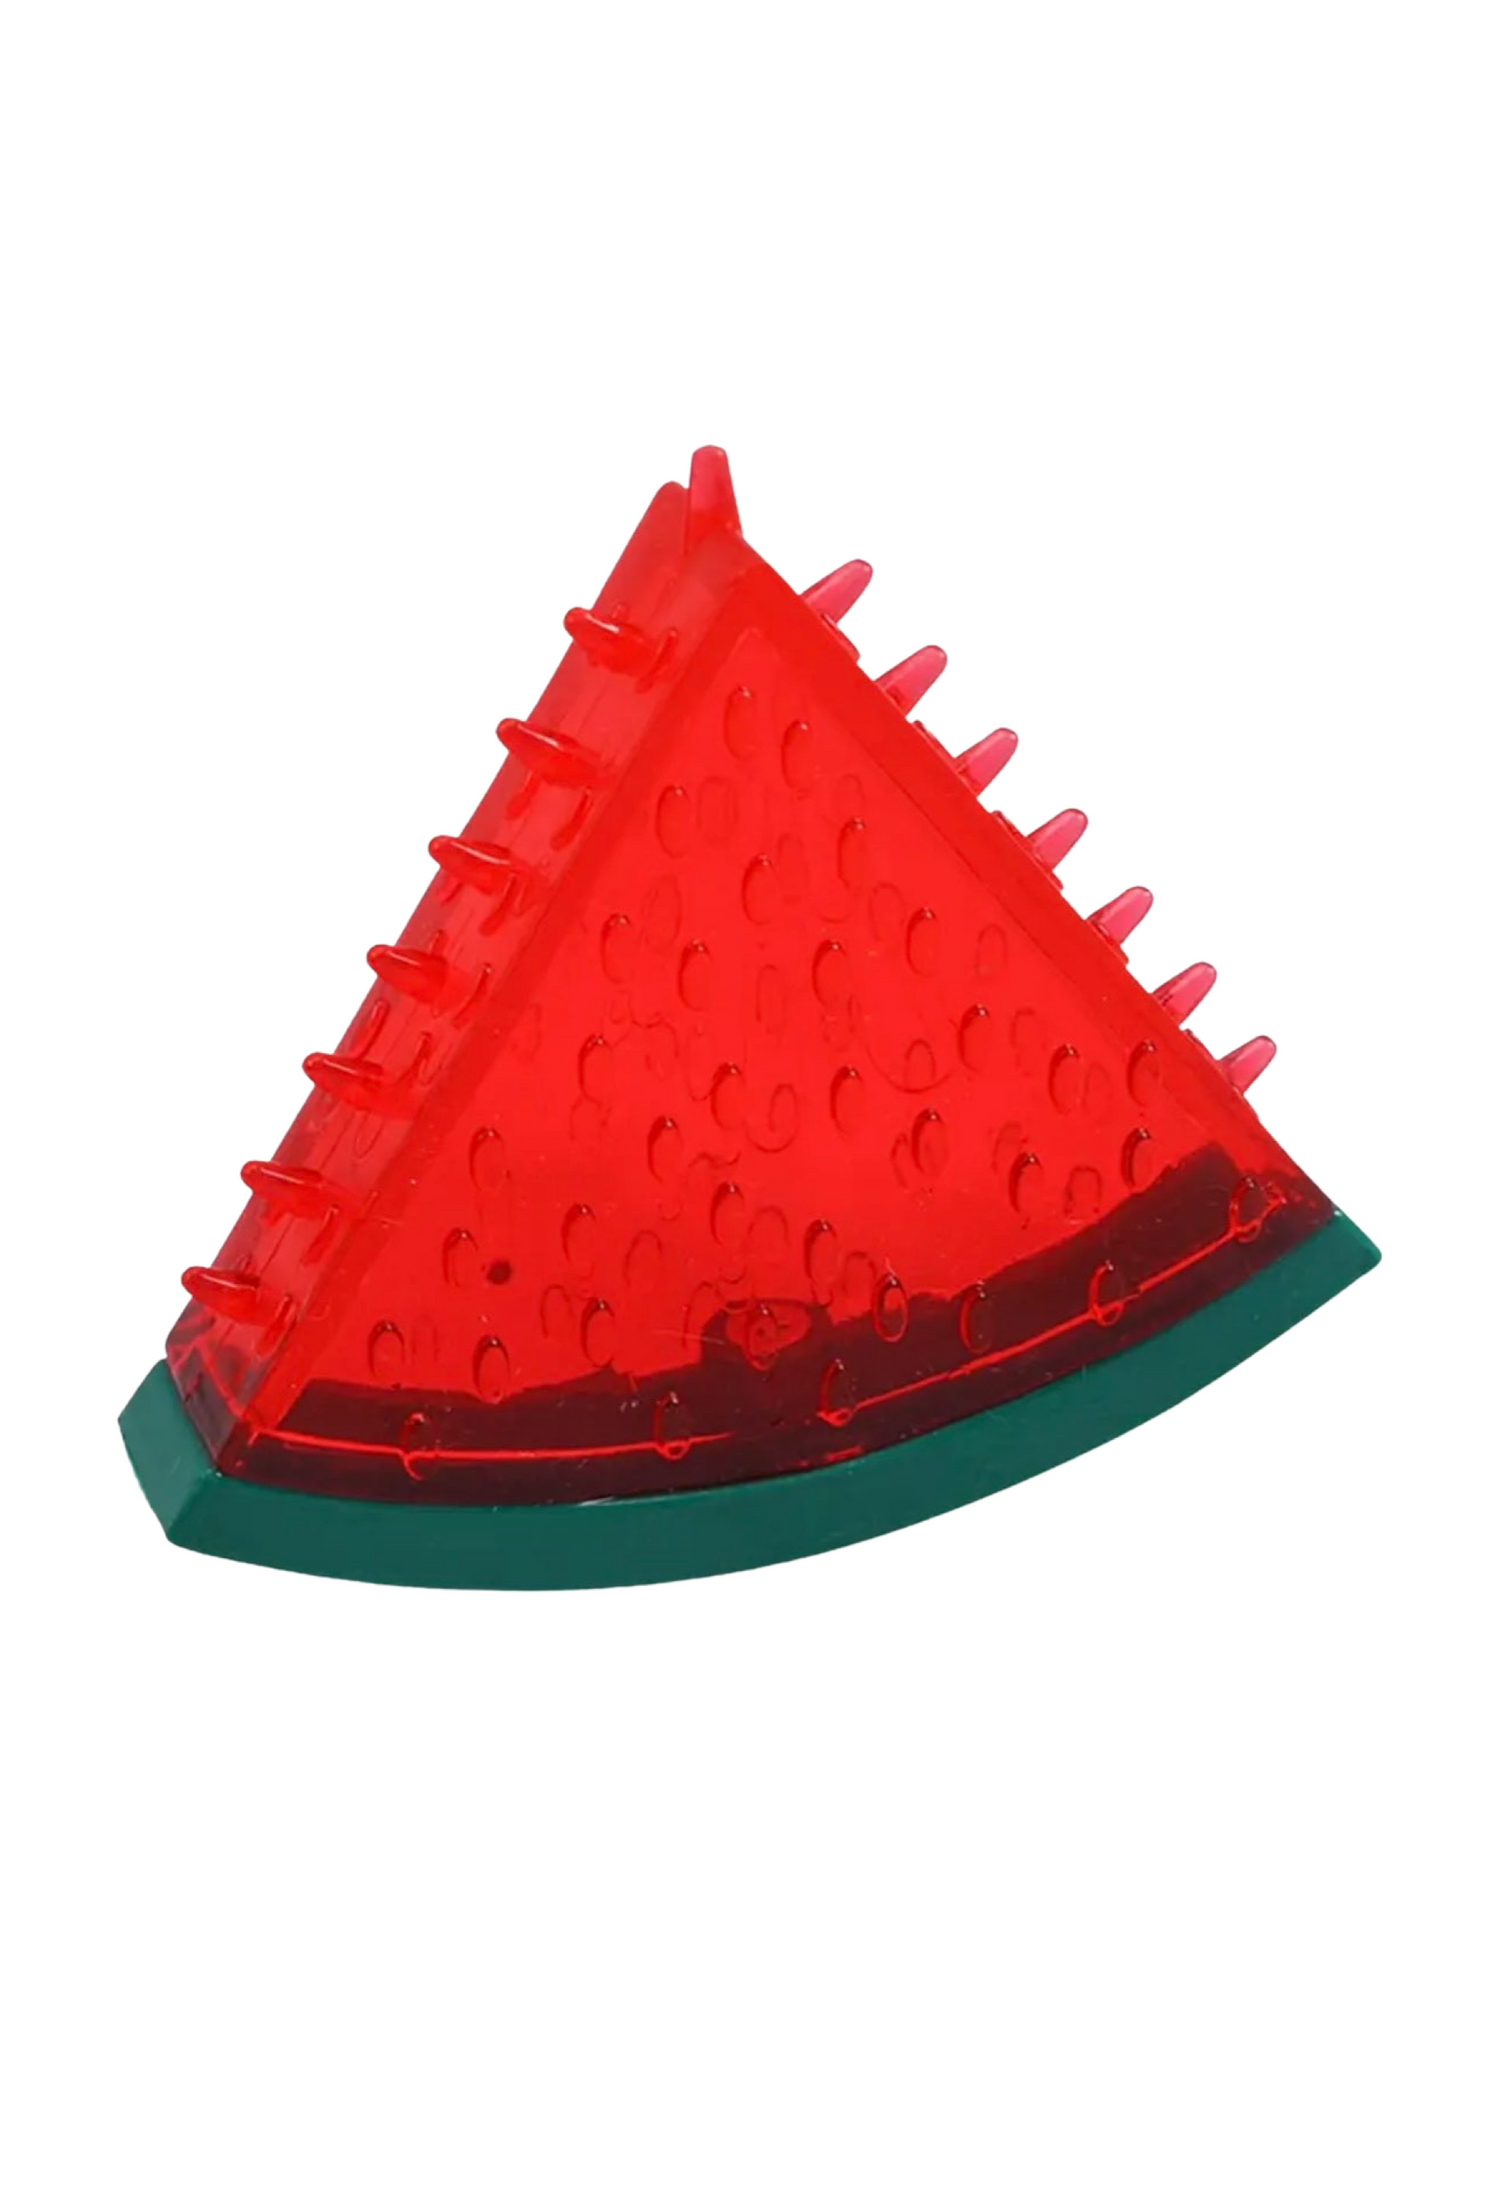 Dog Toy - Cooling Chew Toy Watermelon